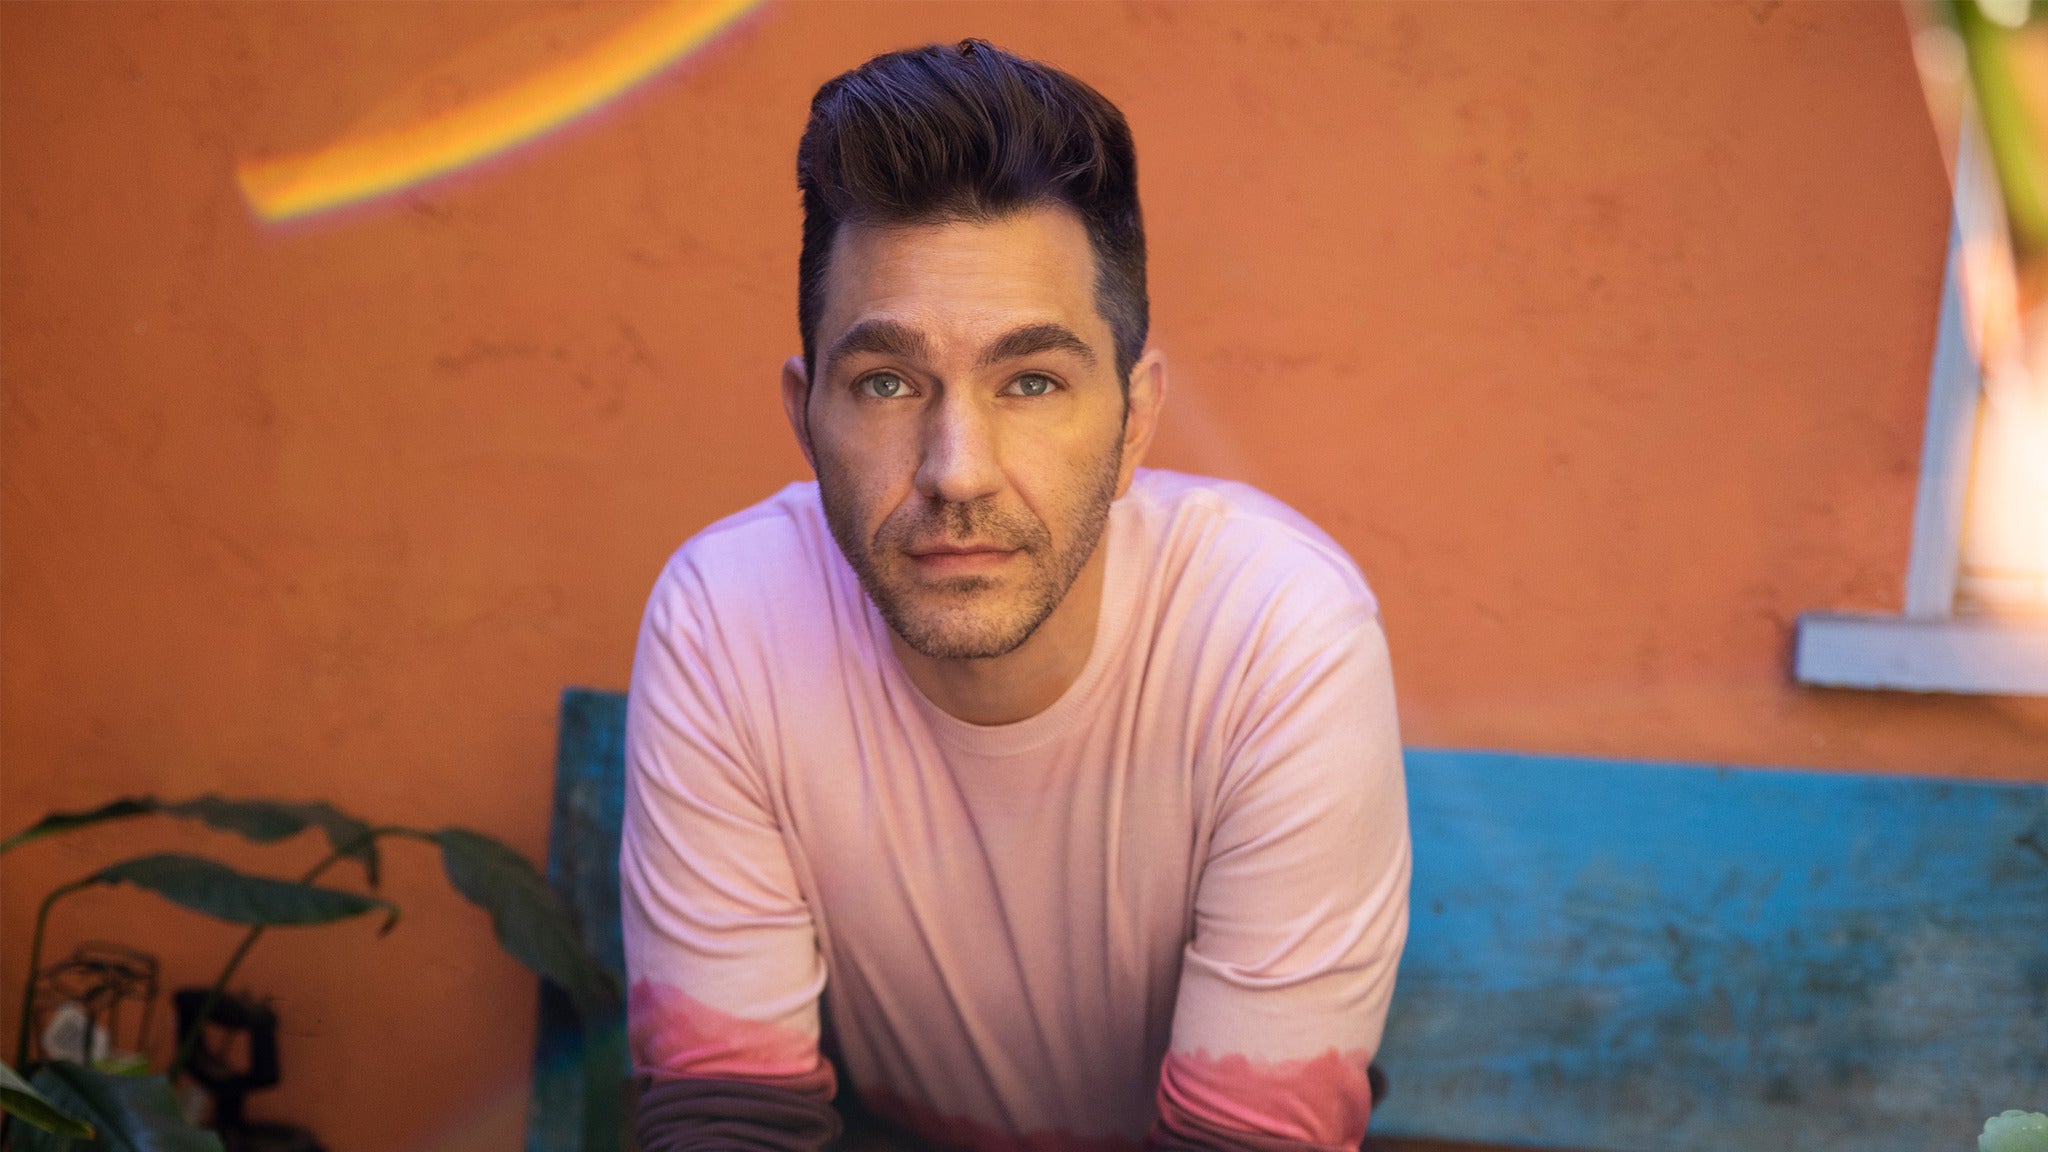 Andy Grammer - the Art of Joy Tour at Fillmore Minneapolis